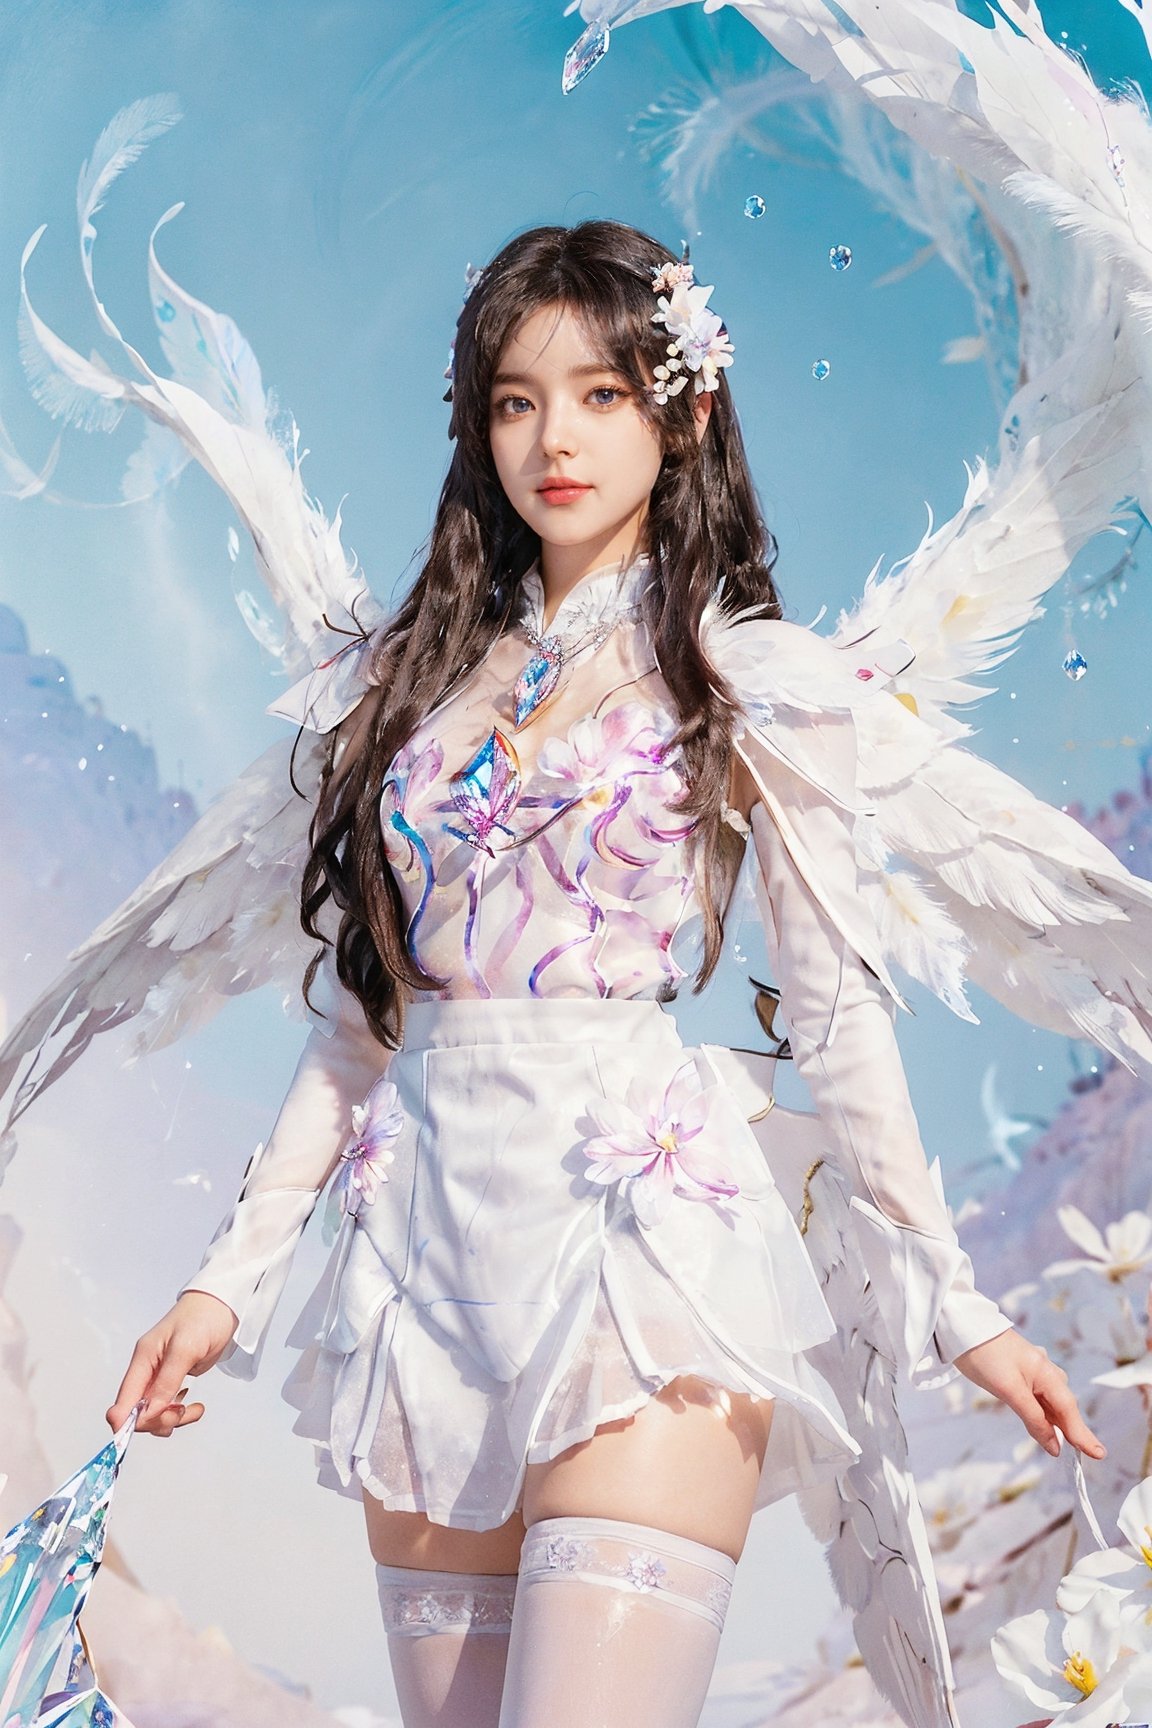 masterpiece,{{{best quality}}},(illustration)),{{{extremely detailed CG unity 8k wallpaper}}},game_cg,(({{1girl}})),{solo}, (beautiful detailed eyes),((shine eyes)),goddess,fluffy hair,messy_hair,ribbons,hair_bow,{flowing hair}, (glossy hair), (Silky hair),((white stockings)),(((gorgeous crystal armor))),cold smile,stare,cape,(((crystal wings))),((grand feathers)),((altocumulus)),(clear_sky),(snow mountain),((flowery flowers)),{(flowery bubbles)},{{cloud map plane}},({(crystal)}),crystal poppies,({lacy}) ({{misty}}),(posing sketch),(Brilliant light),cinematic lighting,((thick_coating)),(glass tint),(watercolor),(Ambient light),long_focus,(Colorful blisters),ukiyoe style,, 